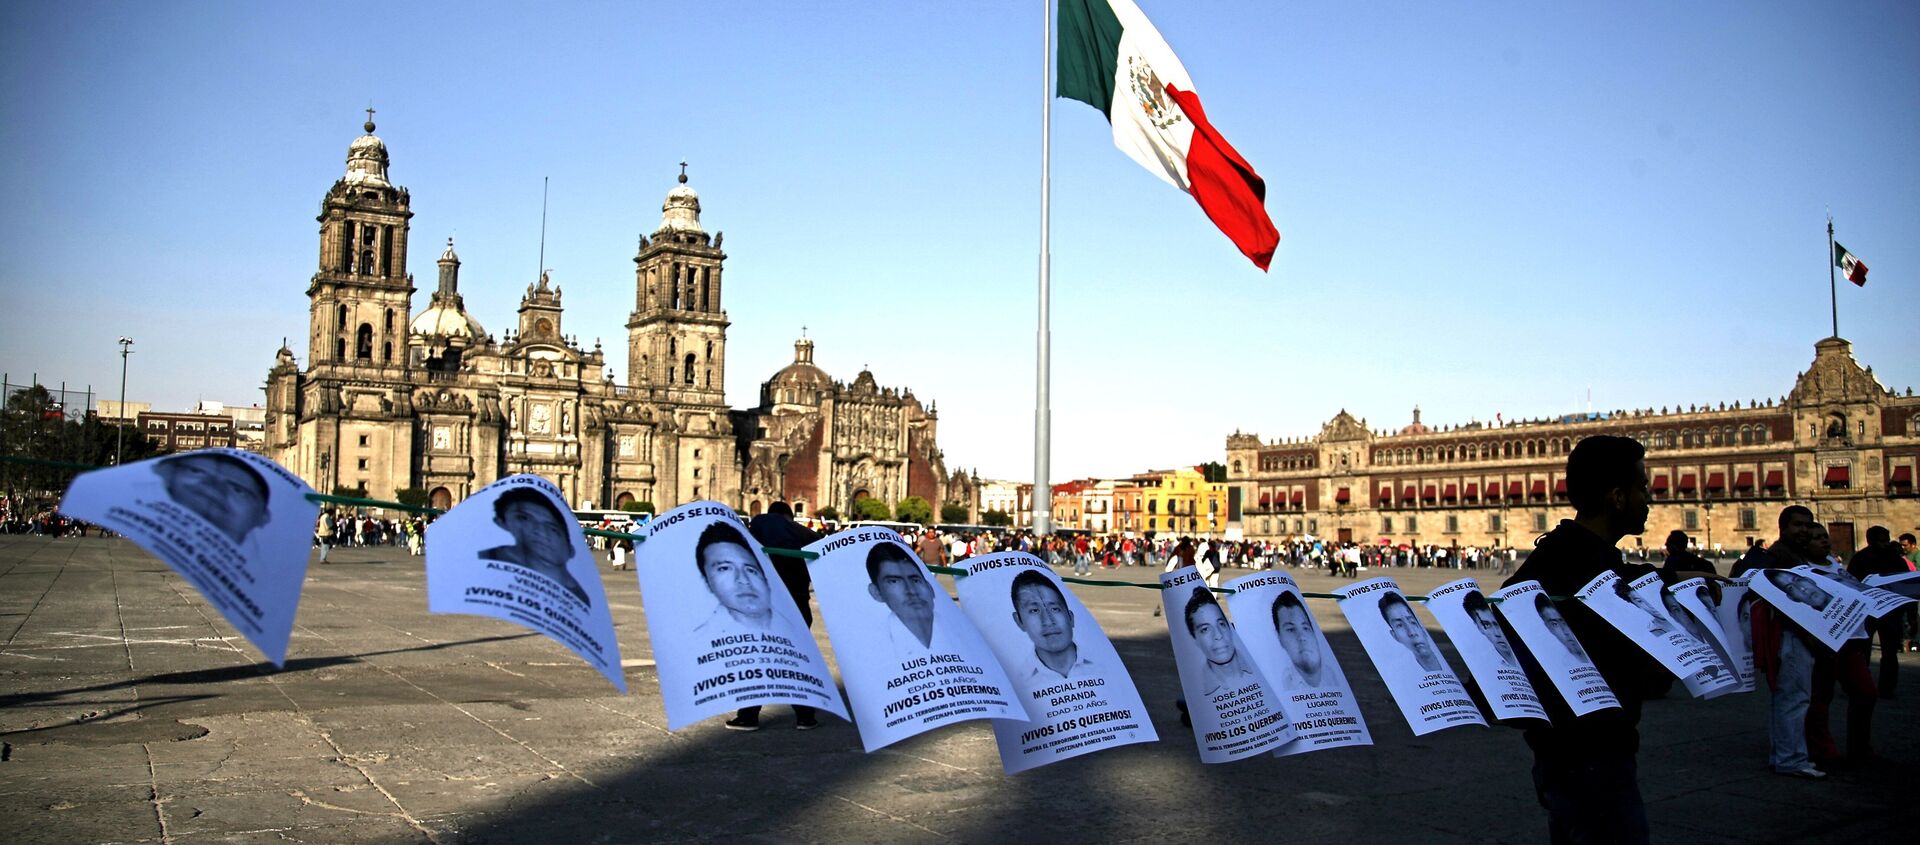 Leaflets with the images of 43 missing students from the state of Guerrero, are shown before a massive protest march, at the Zocalo in Mexico City - Sputnik International, 1920, 25.04.2016